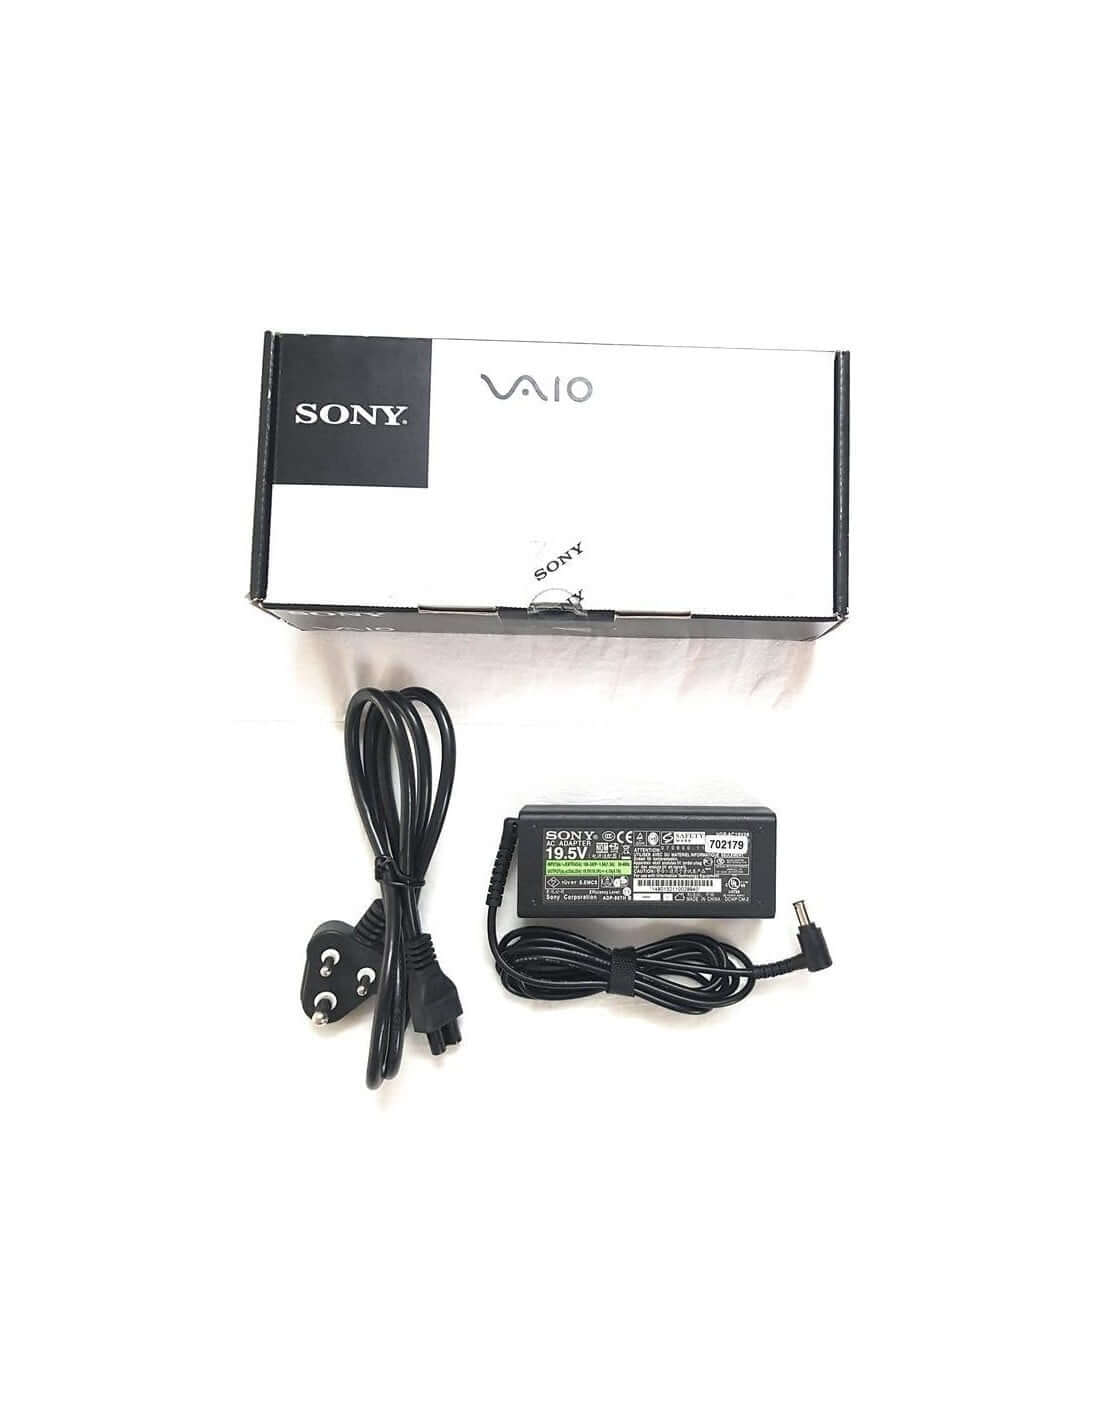 SONY VAIO 75w Original Laptop Charger - 19.5V 3.9A Genuine AC Power Adapter ( 6.5mm * 4.4mm) BPS26